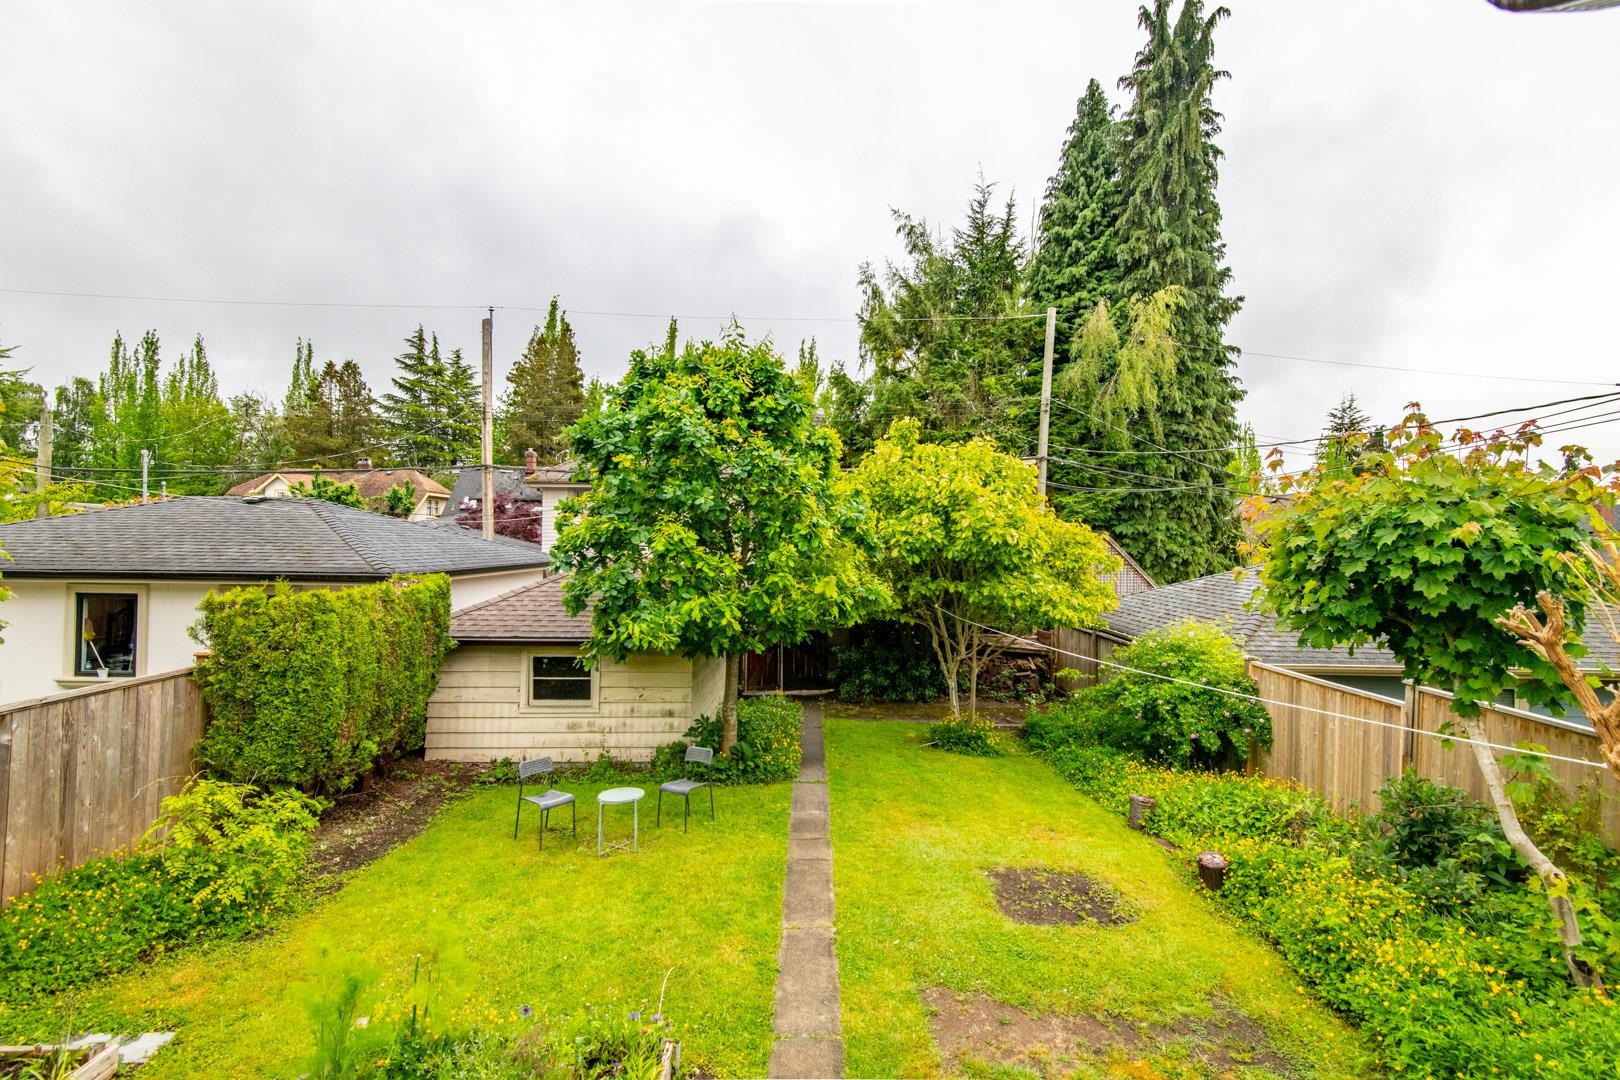 Listing image of 2960 W 41ST AVENUE